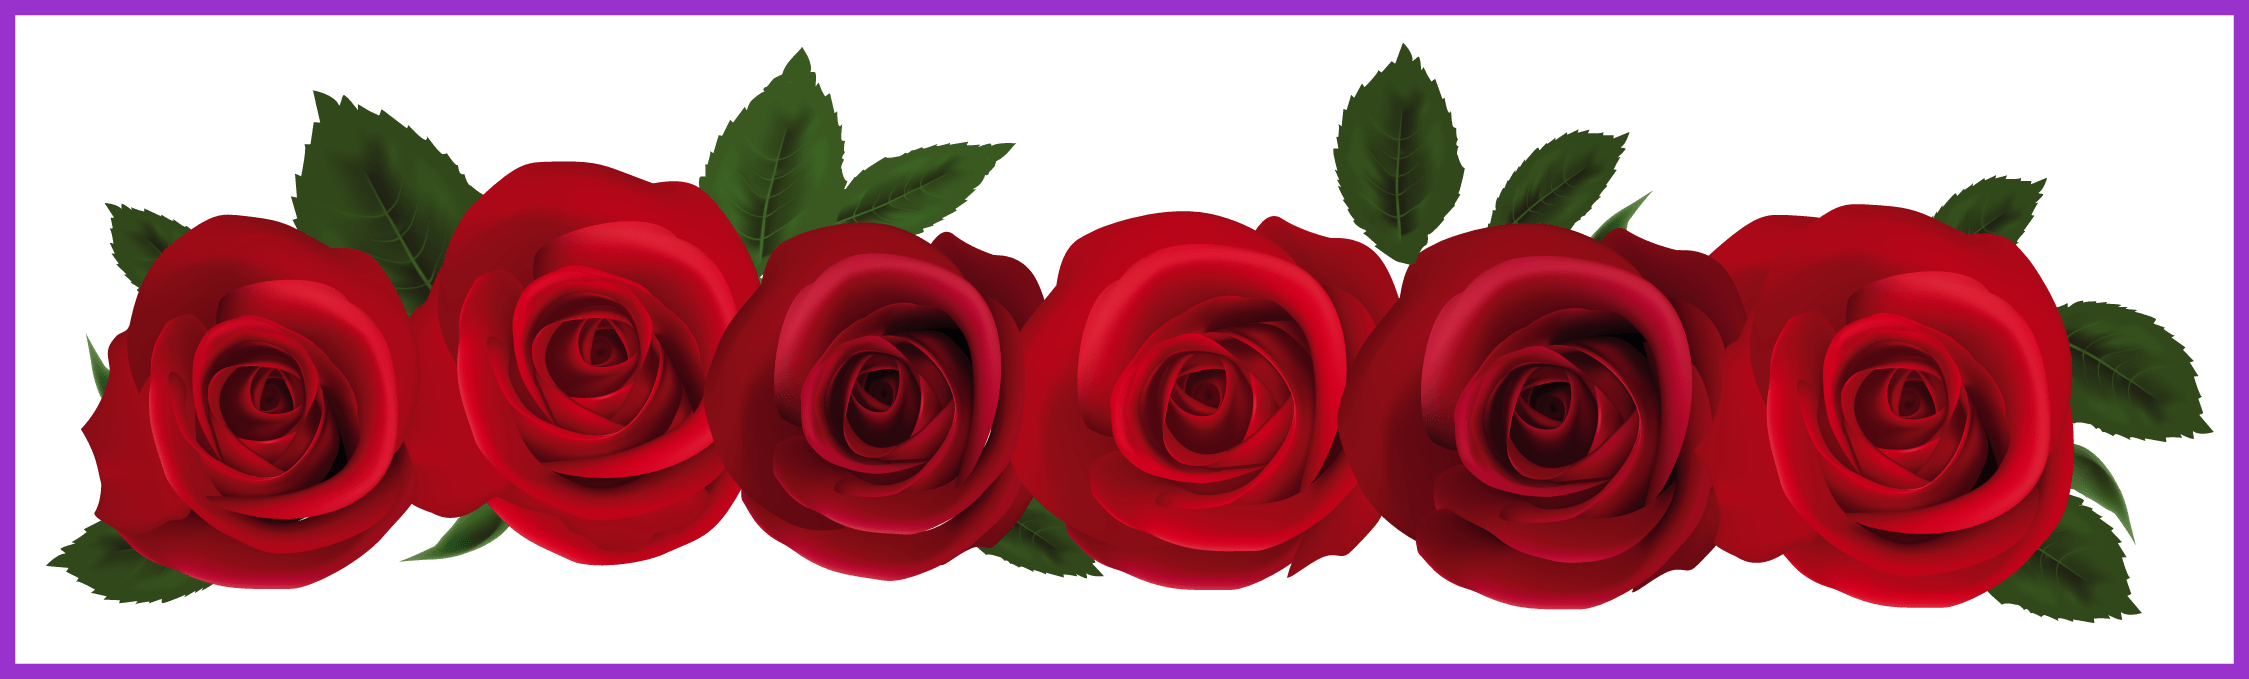 Rose border png. Amazing pink clipart flower